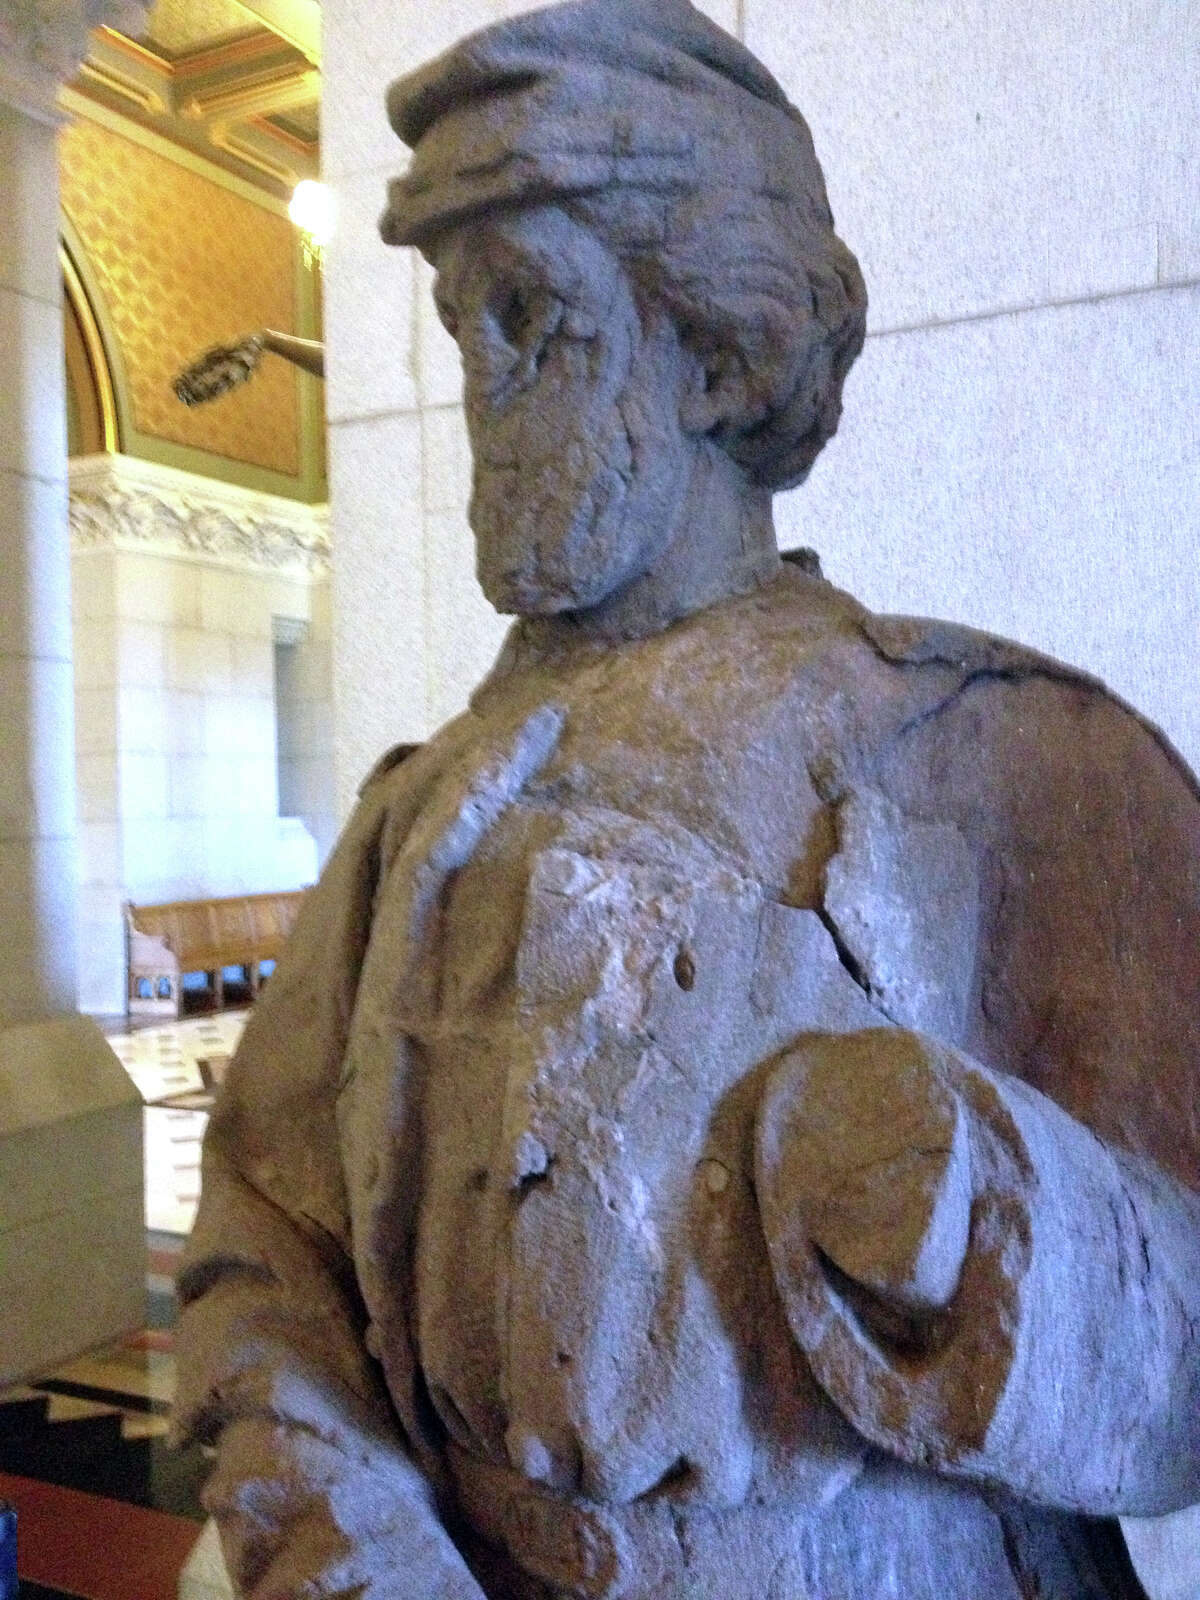 A crumbling civil war statue is being installed at the Capitol in Hartford.